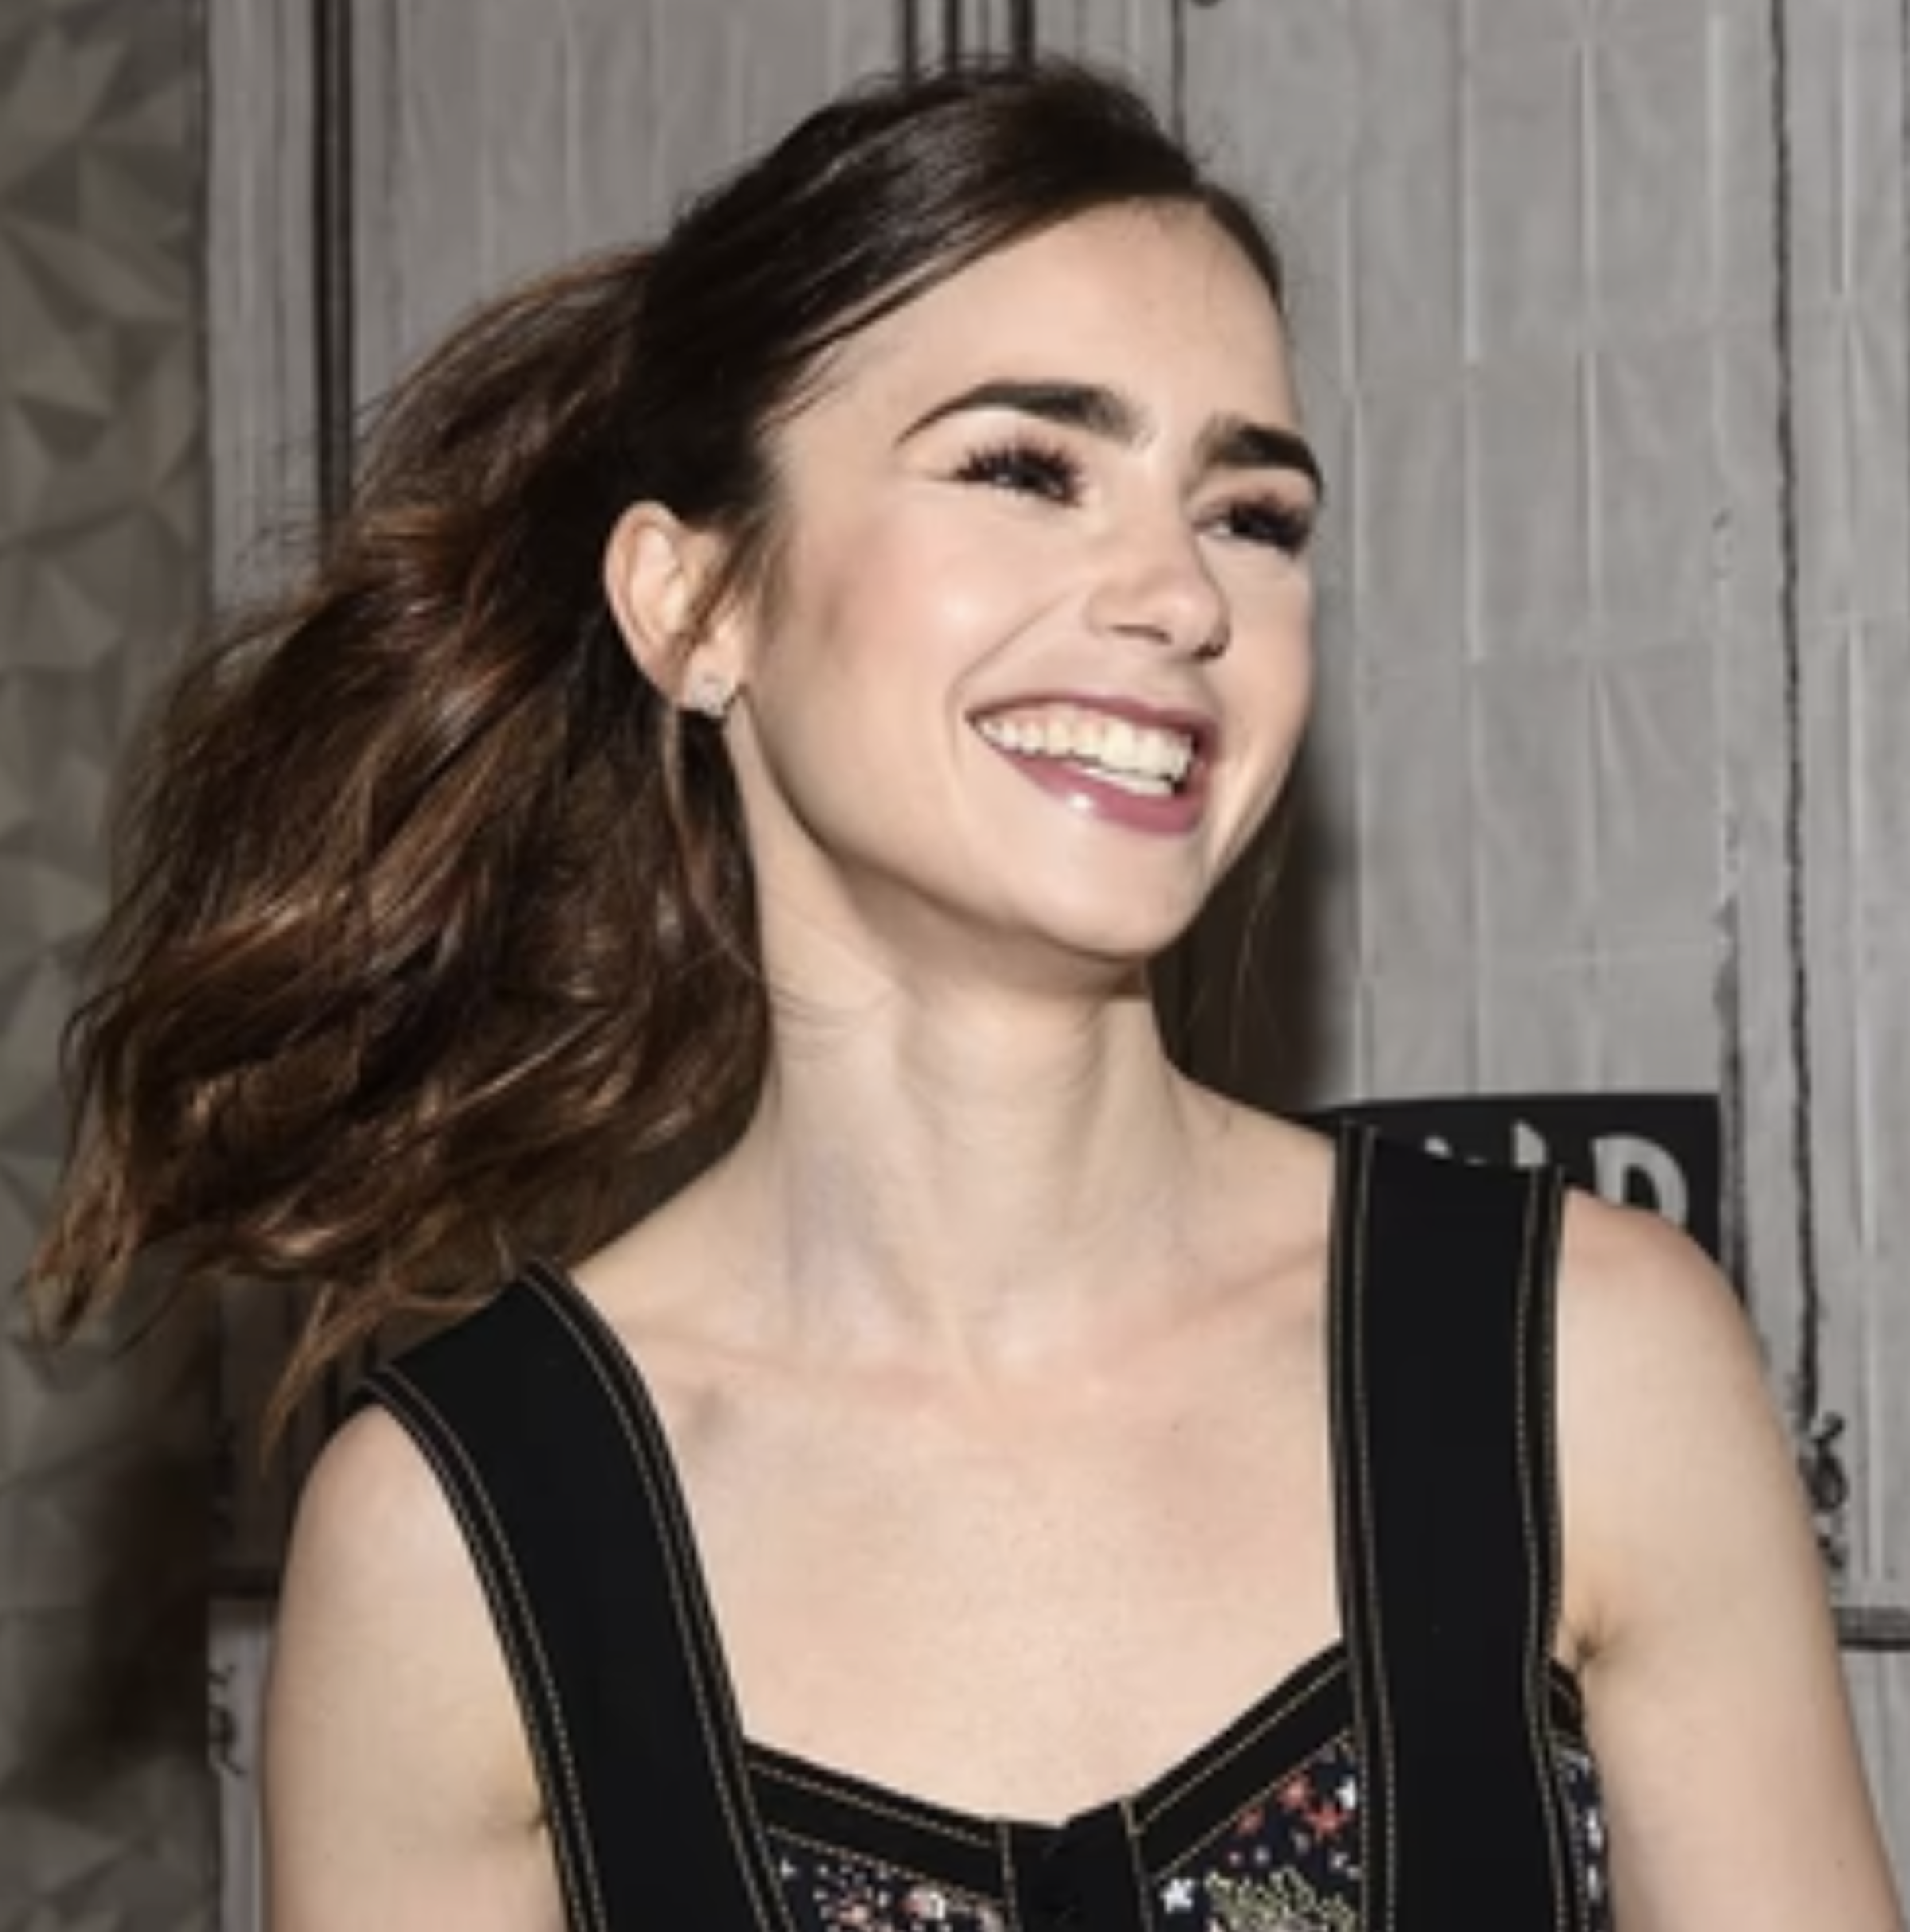 Lily Collins, the lead actress in 'Emily in Paris.' Photo provided by CurrentBody.